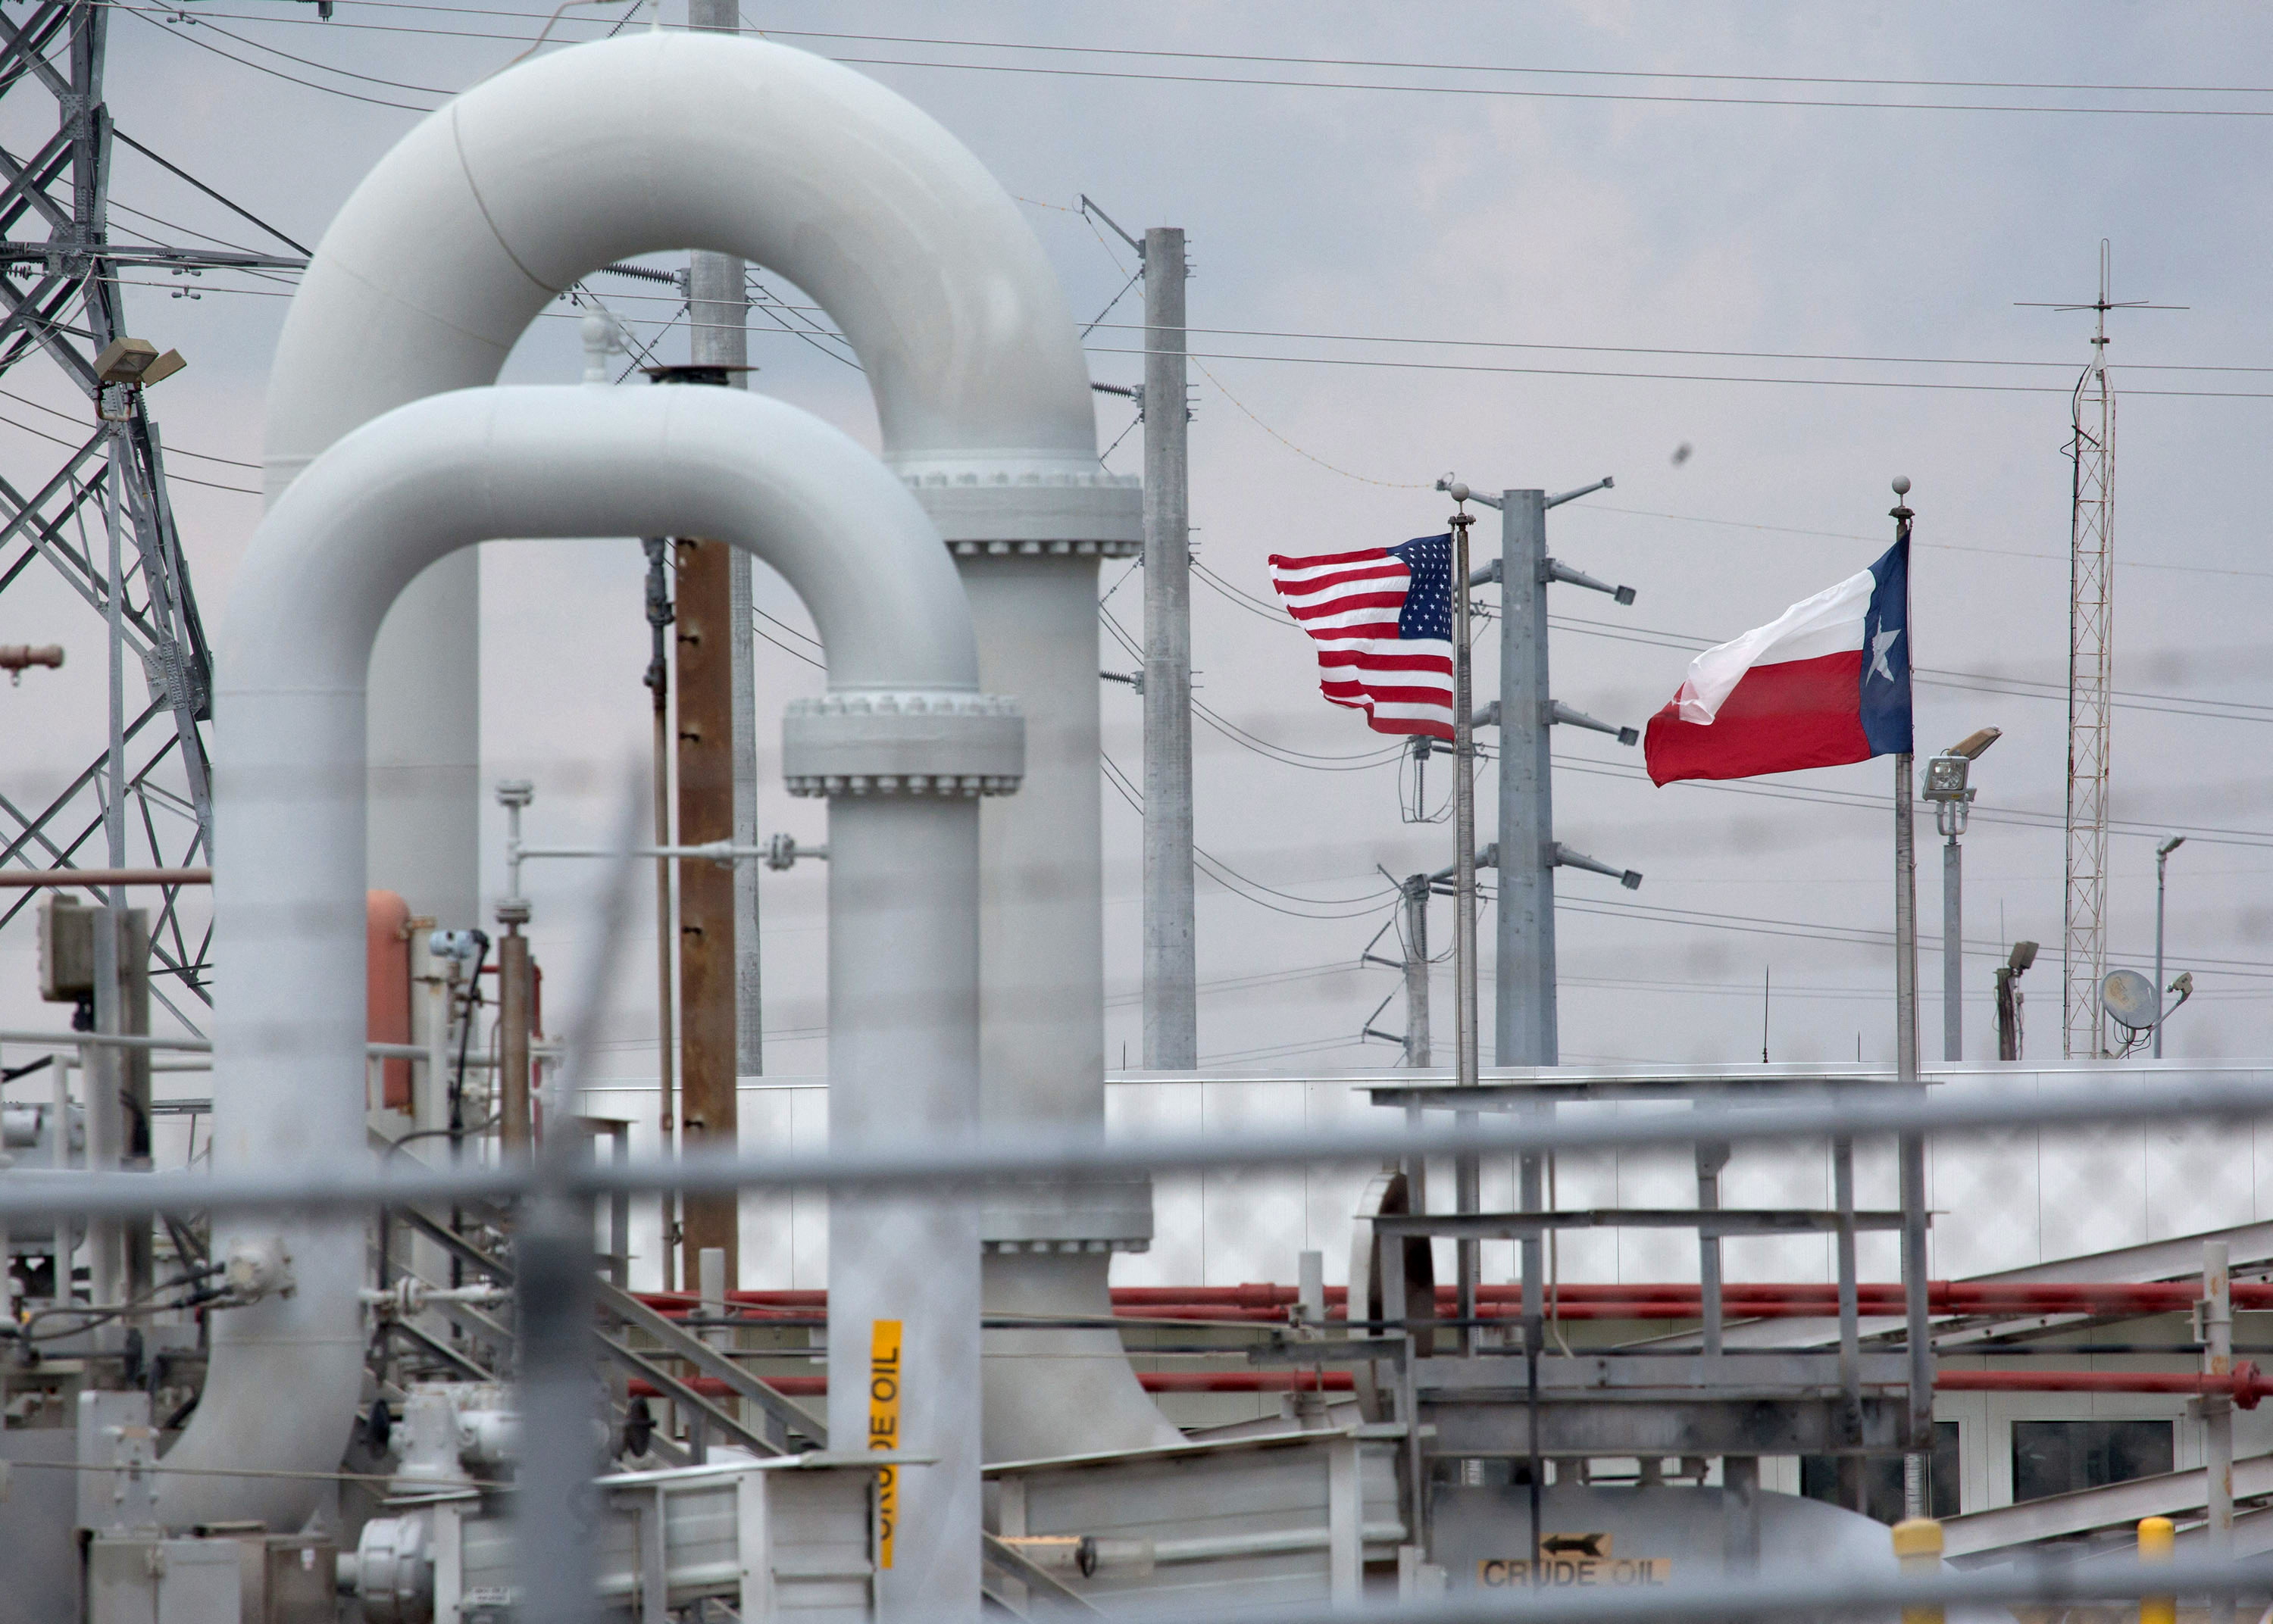 A maze of crude oil pipe and equipment is seen with the American and Texas flags flying during a tour by the Department of Energy at the Strategic Petroleum Reserve in Freeport